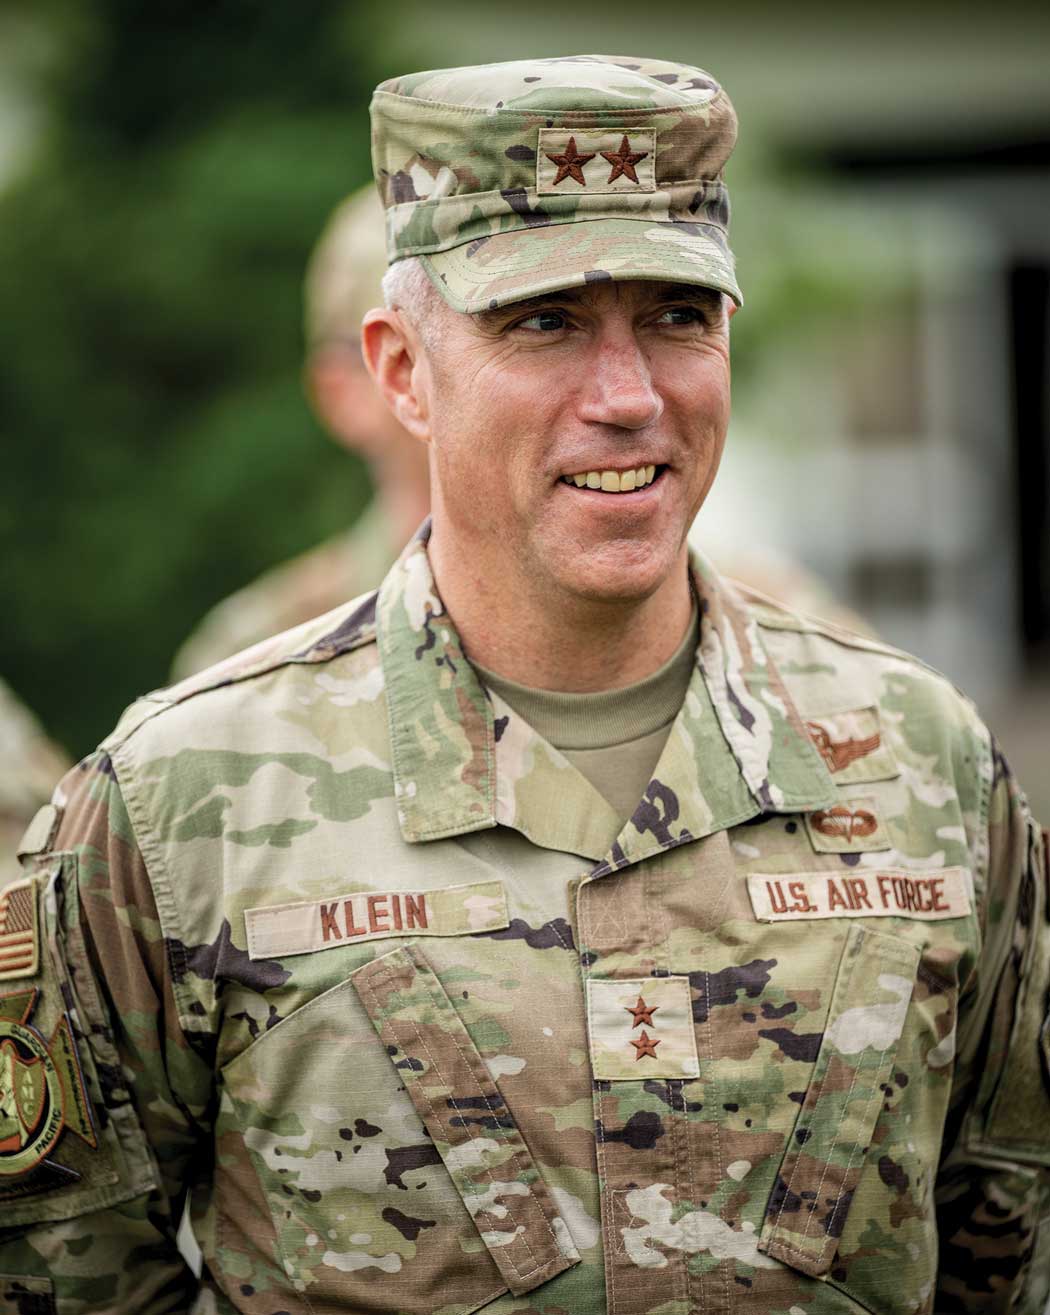 U.S. Air Force Expeditionary Center Commander Maj Gen John Klein, attending a brief while visiting Yakumo Air Base, Japan, as part of Mobility Guardian 23, July 13, 2023. USAF photo by TSgt Alexander Cook